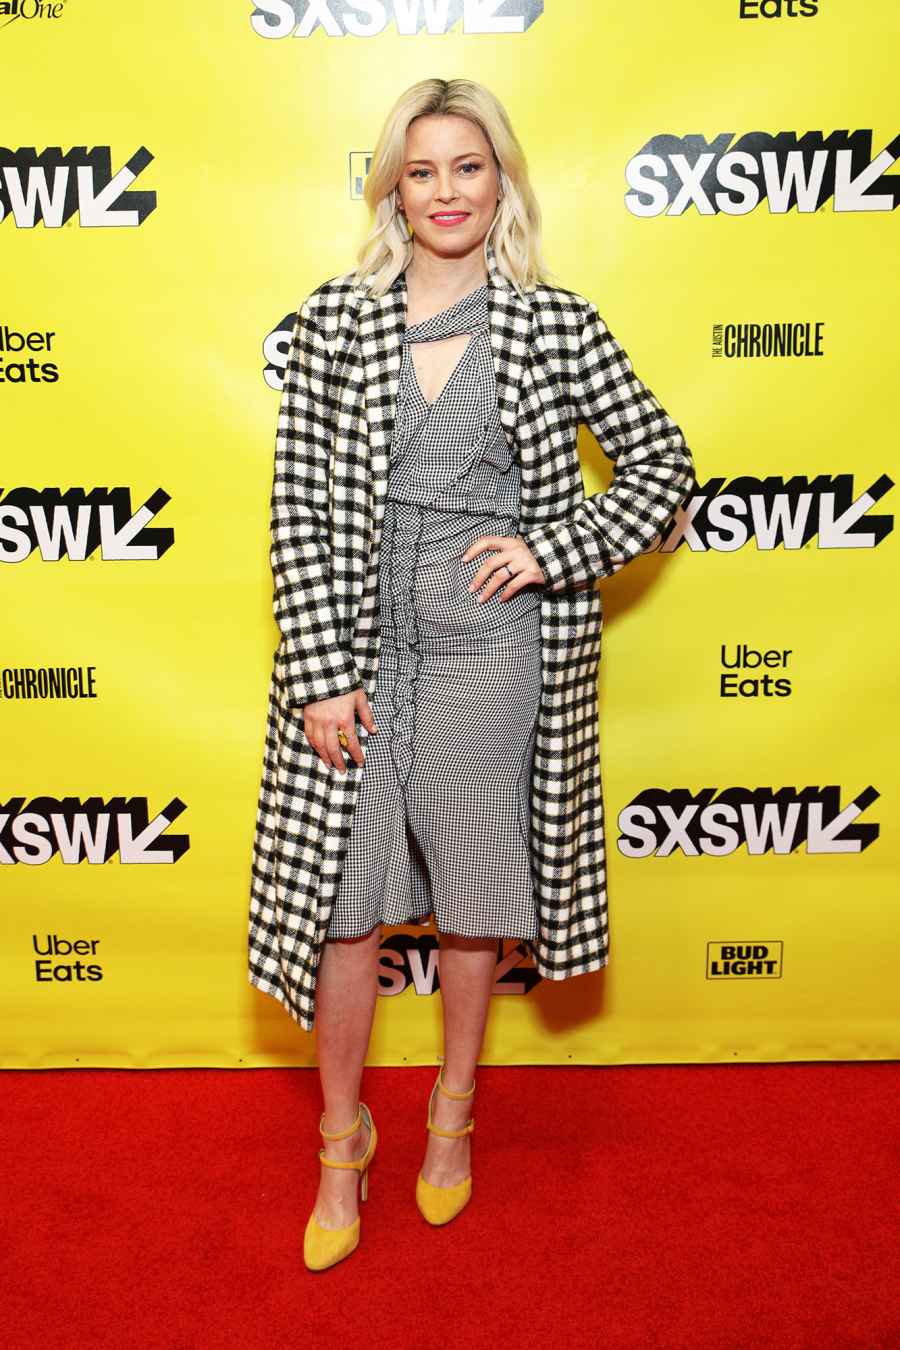 SXSW Is Giving Us Chic Outfit Inspo for Spring